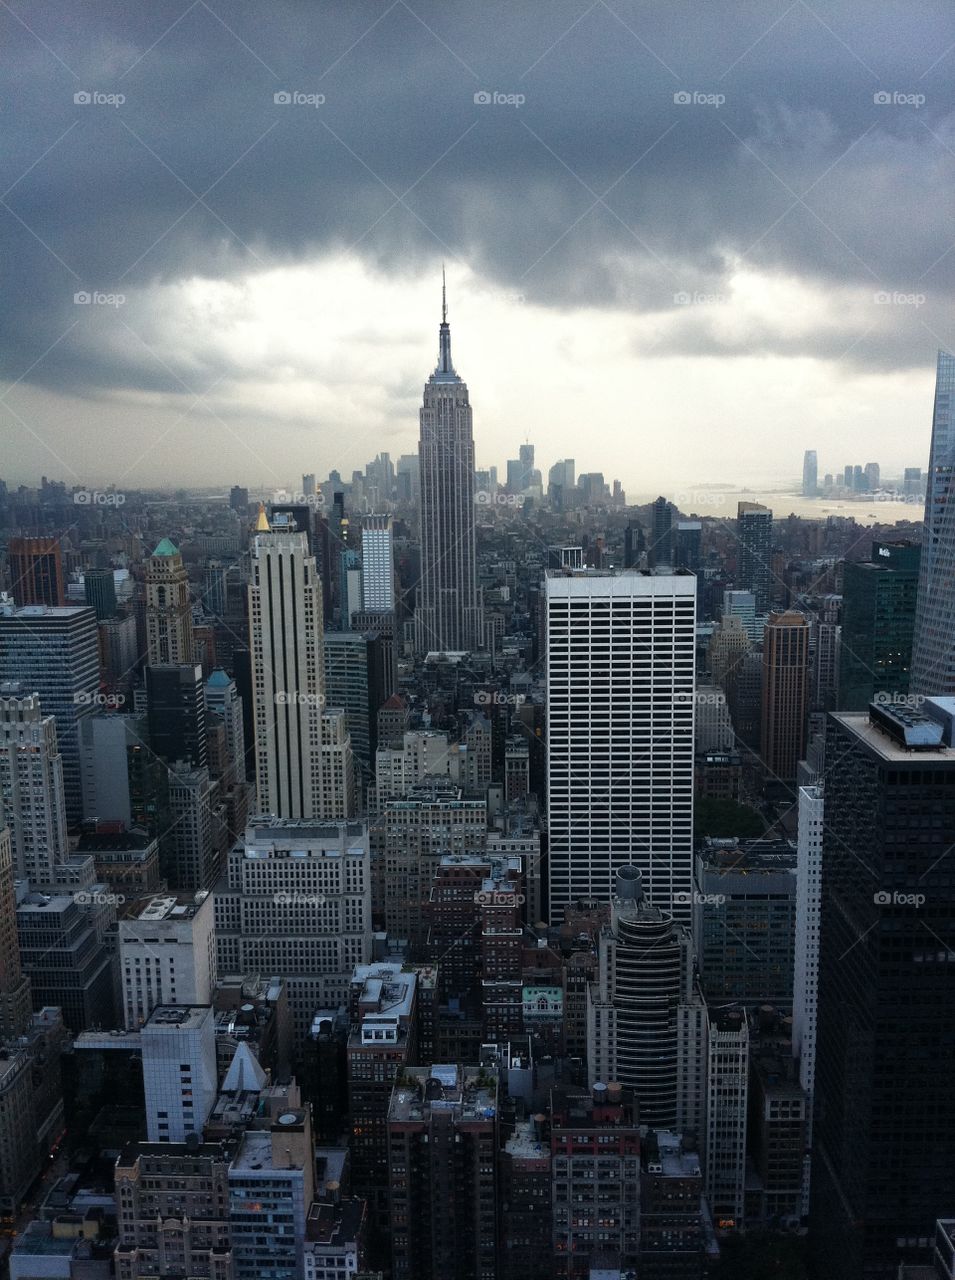 NYC Skyline View on the Empire State Building and Steel Multistoried Skyscrapers from the Top of the Rock Observation Deck Before Storm - Overcast Gray Cloudy Moody Sky